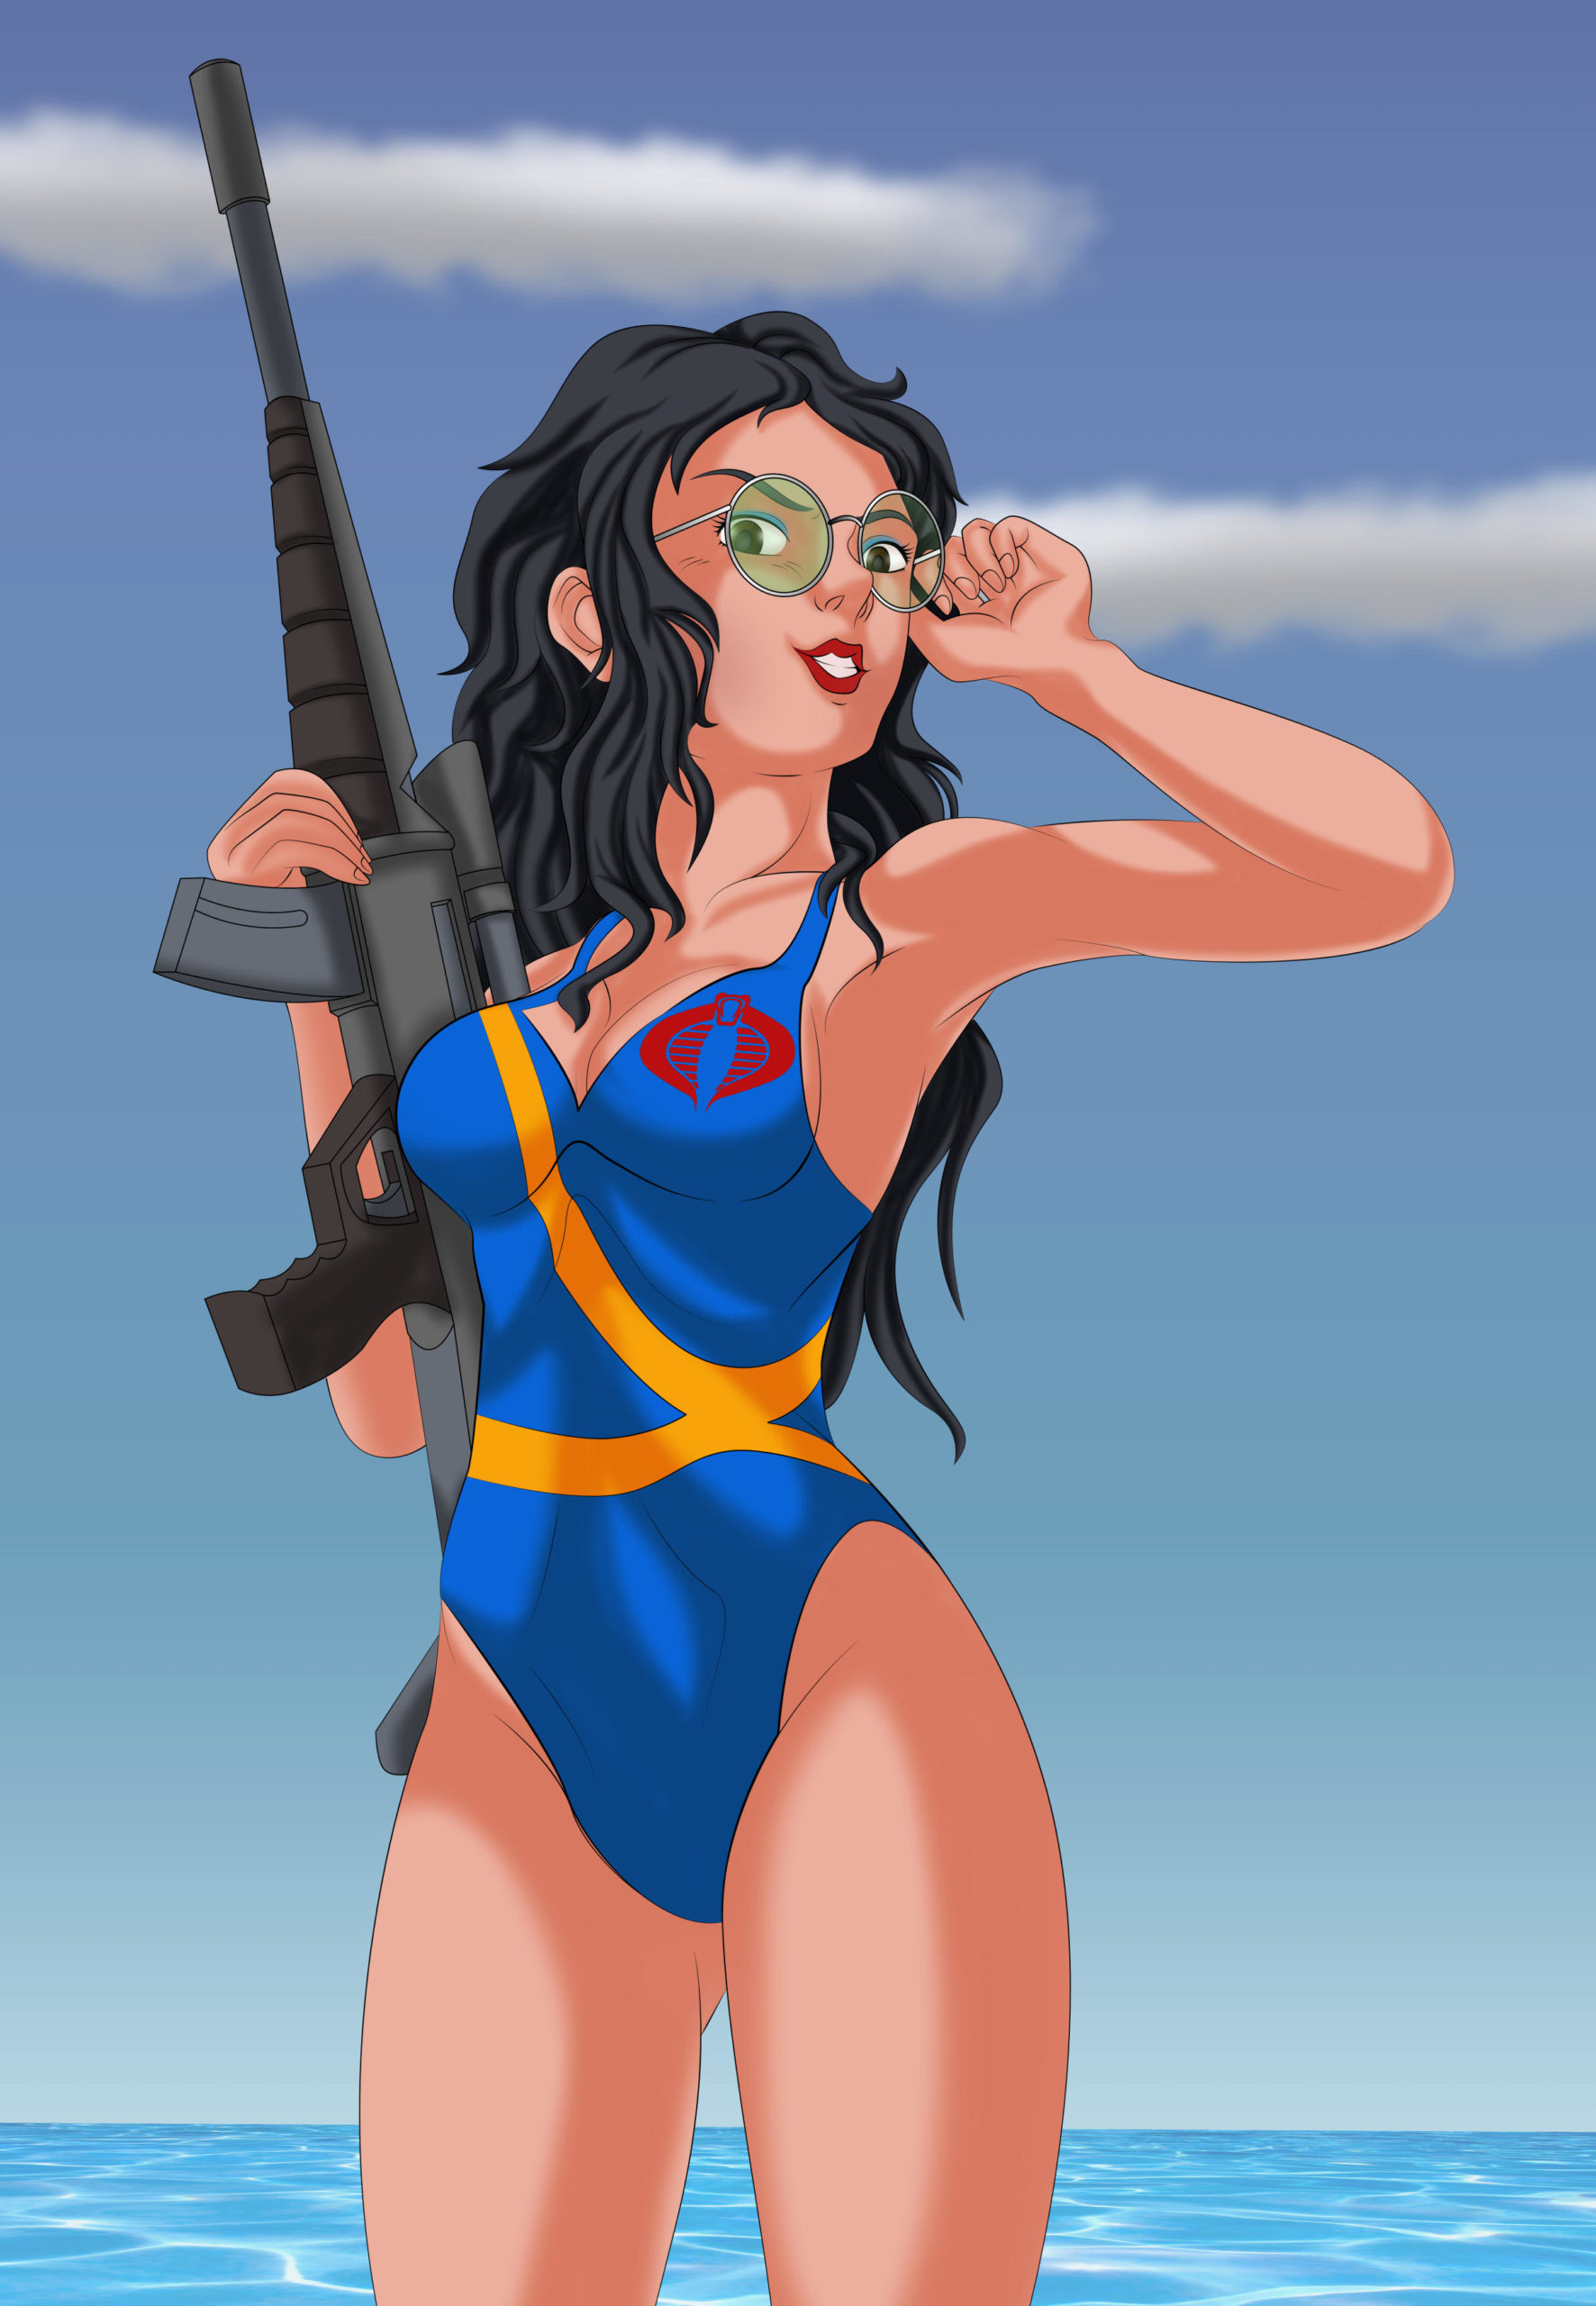 The Baroness from G.I. Joe, in a blue swimsuit with a red Cobra logo, posing against the sea with her sniper rifle.